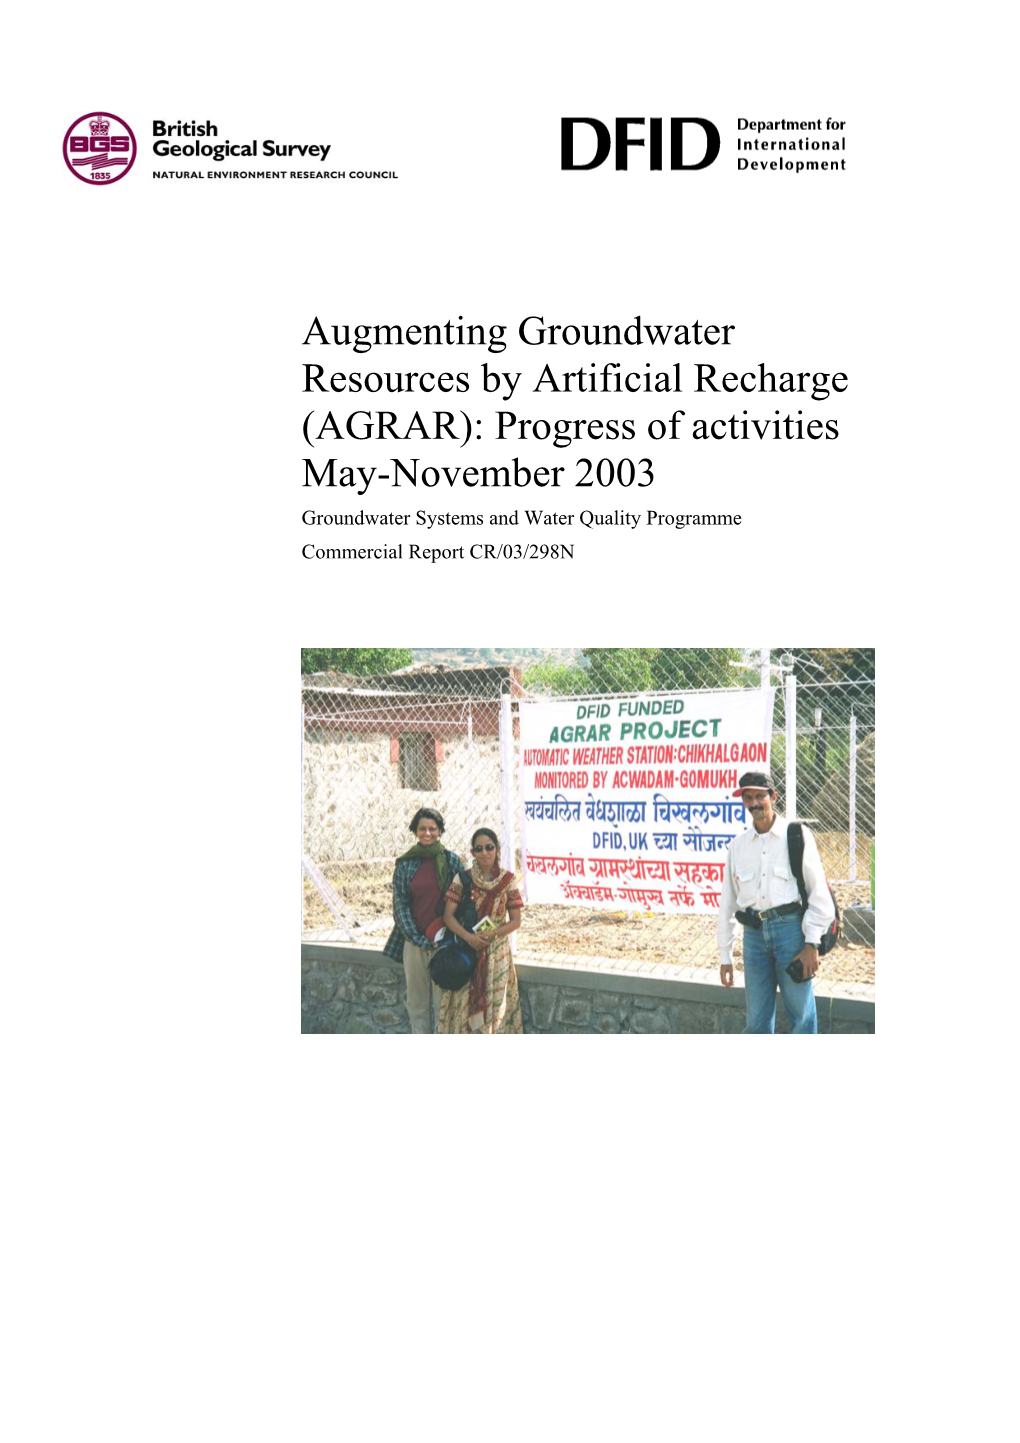 Augmenting Groundwater Resources by Artificial Recharge (AGRAR